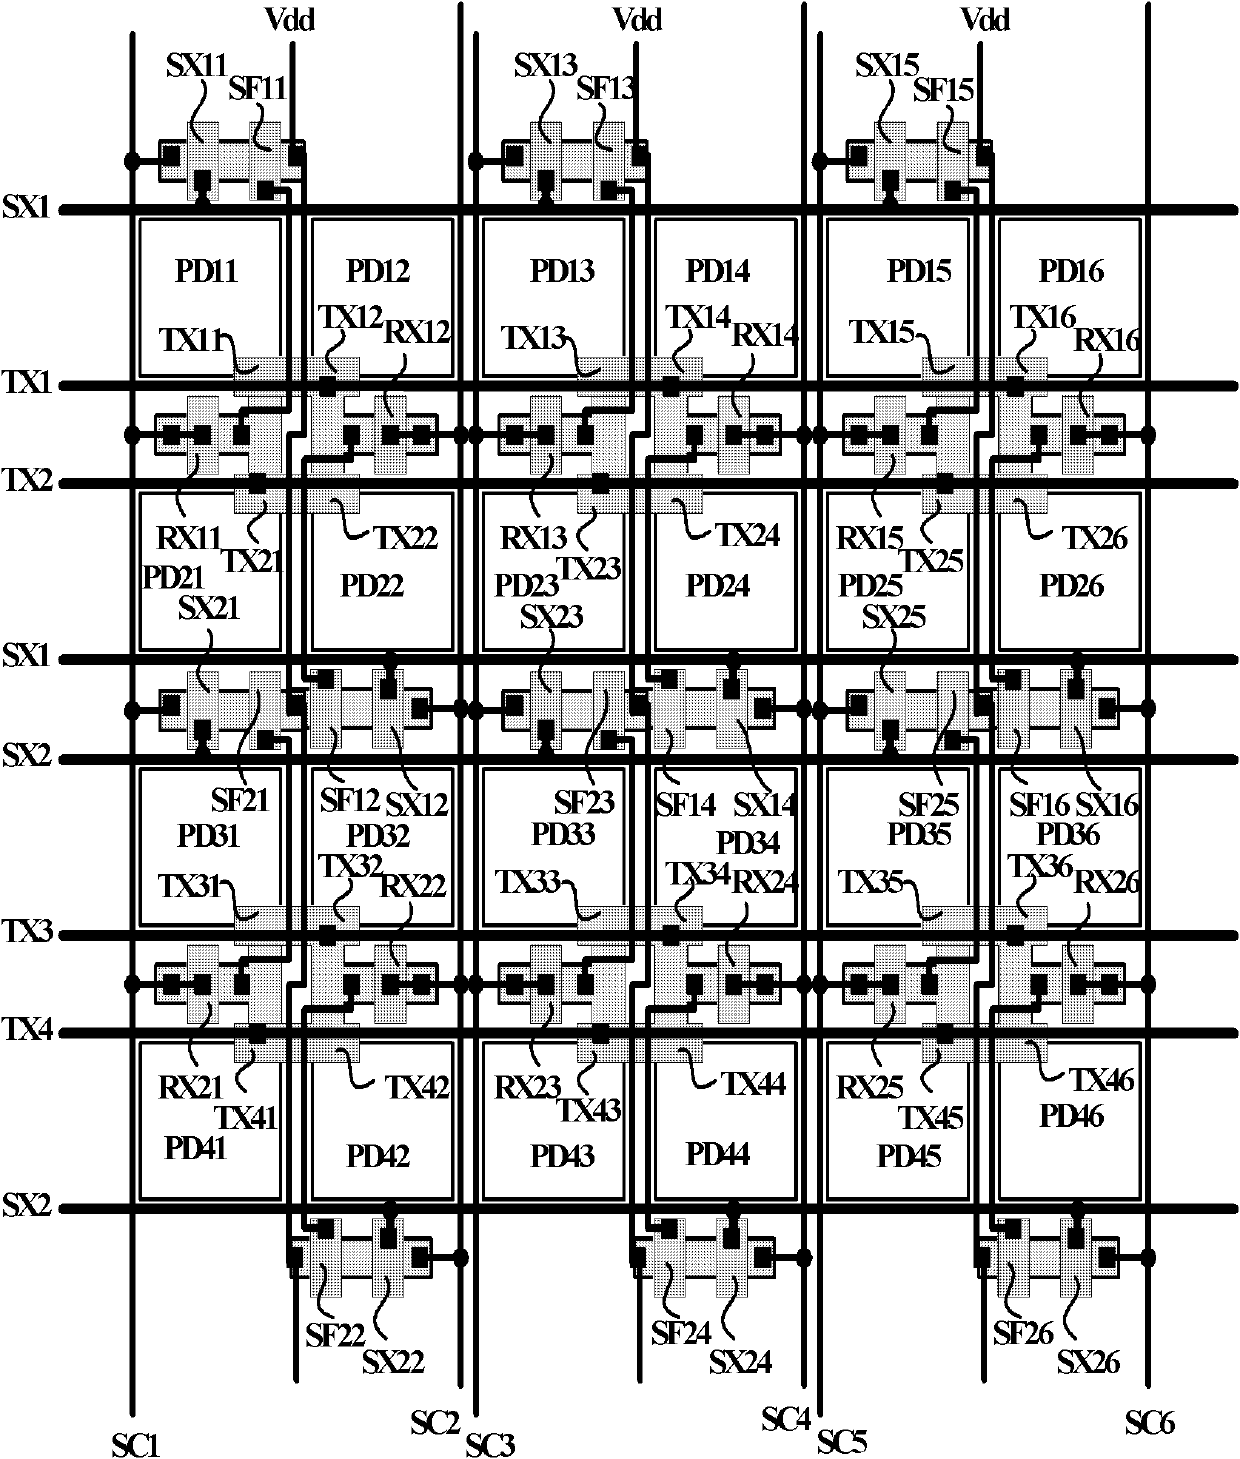 CMOS (Complementary Metal Oxide Semiconductor) image sensor pixel and control time sequence thereof